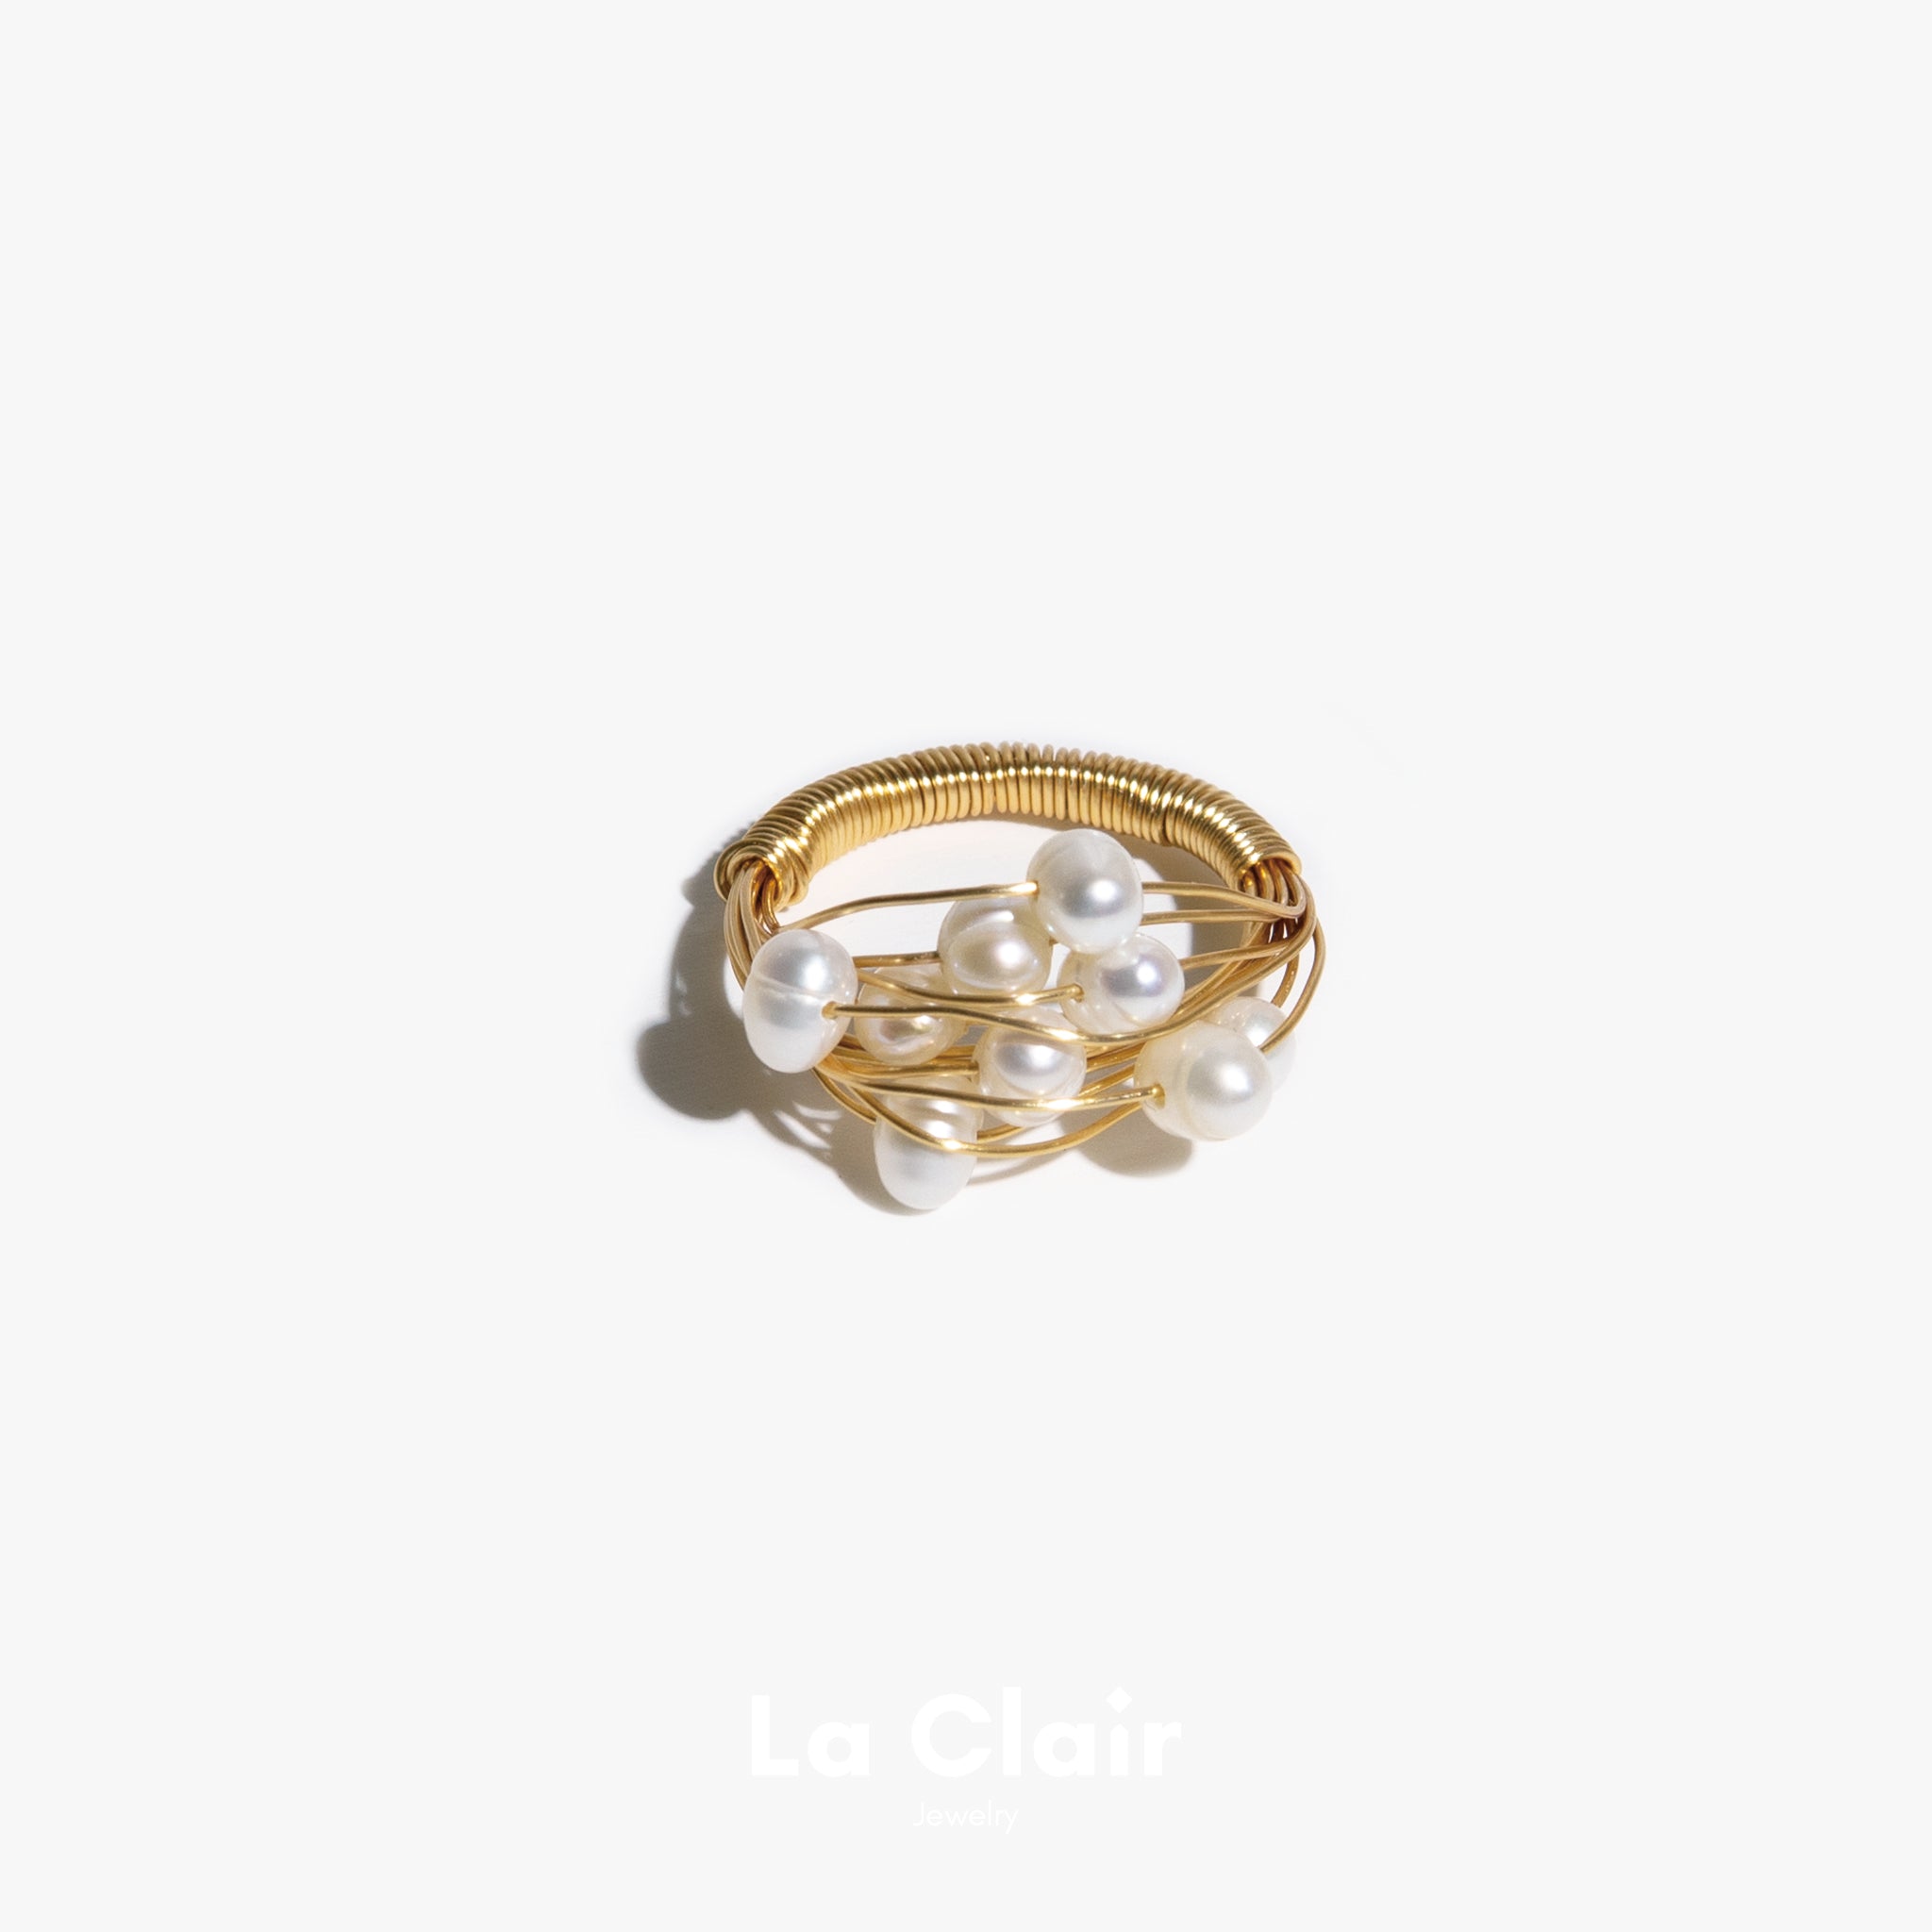 Hand-Woven Wire Ring with Pearl